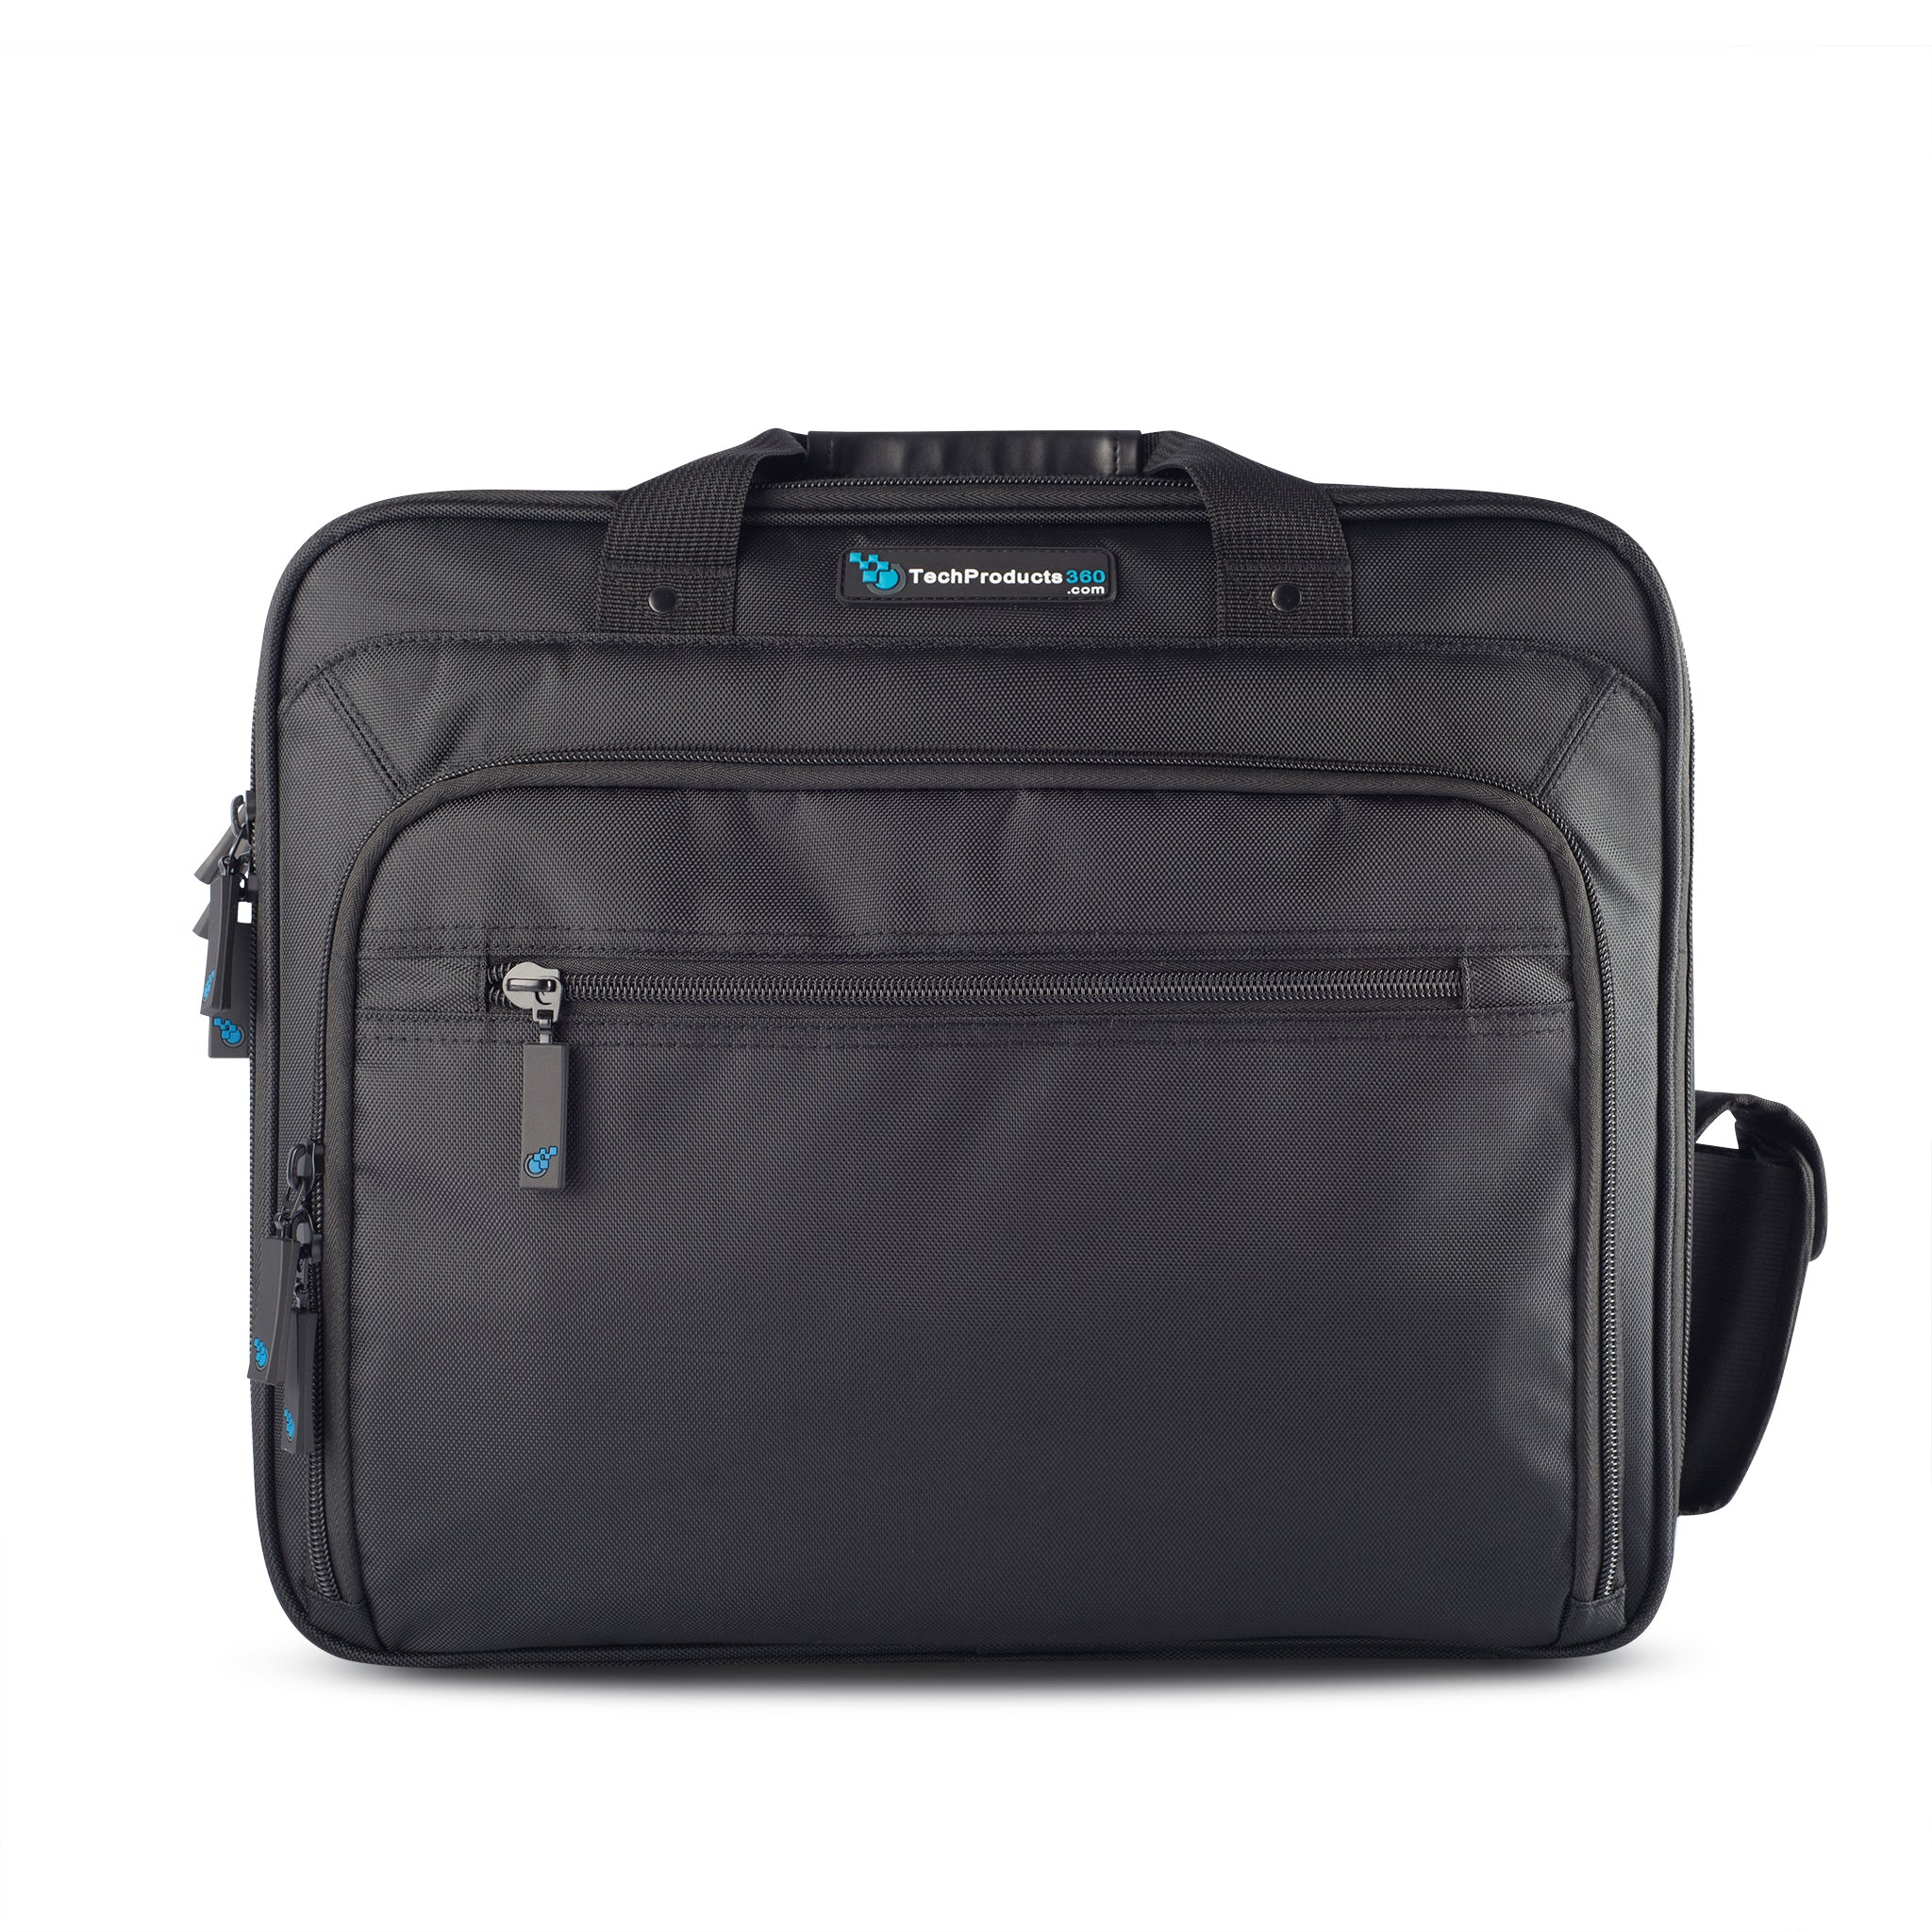 Essential Carrying Case - TechProducts360.com